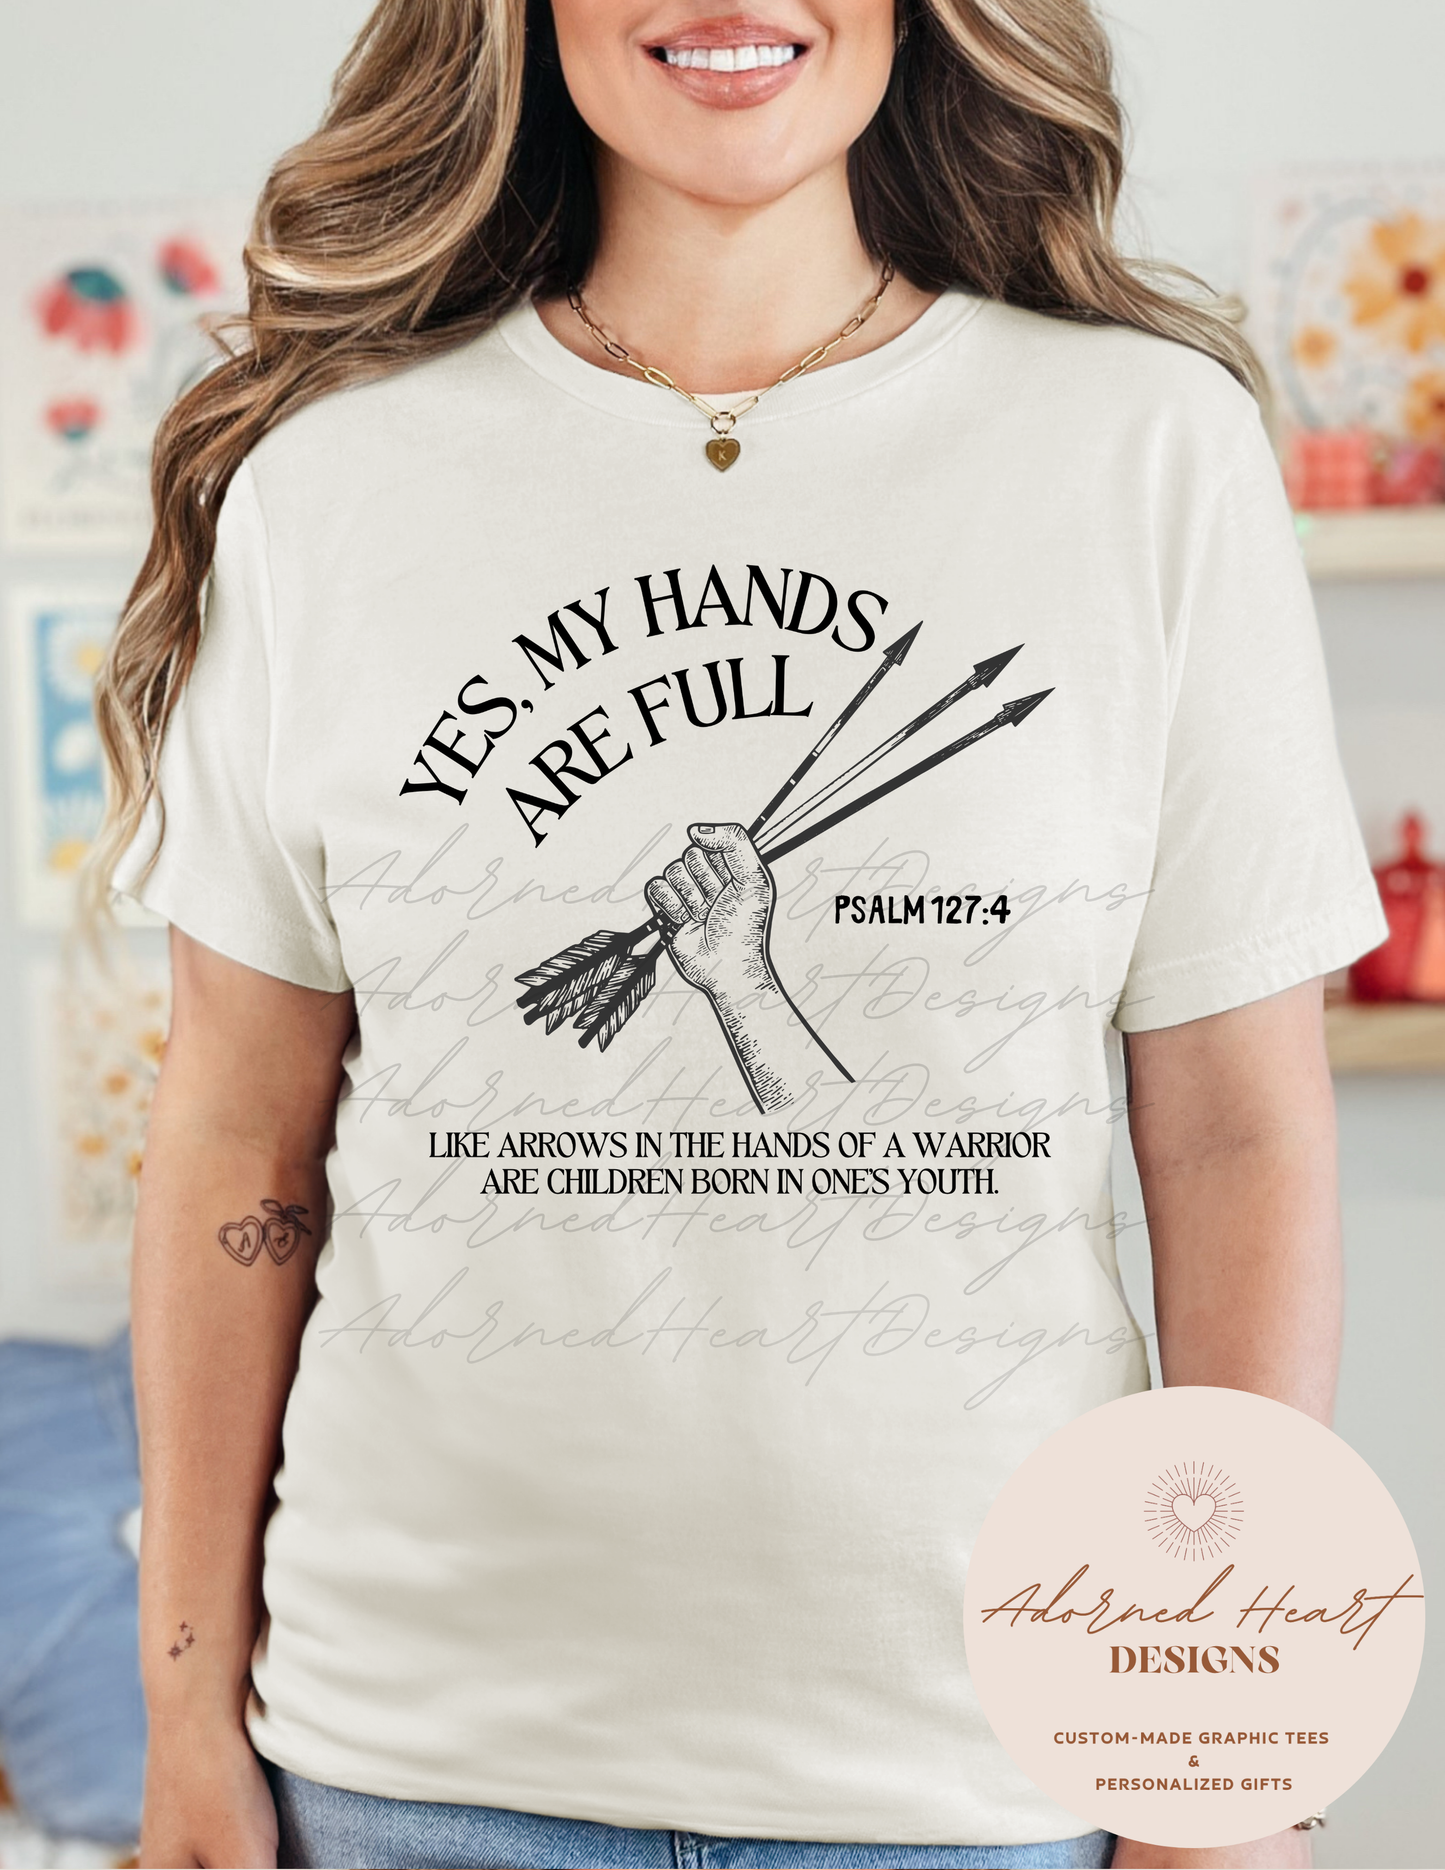 Yes, My Hands Are Full T-Shirt (Front Image Only)